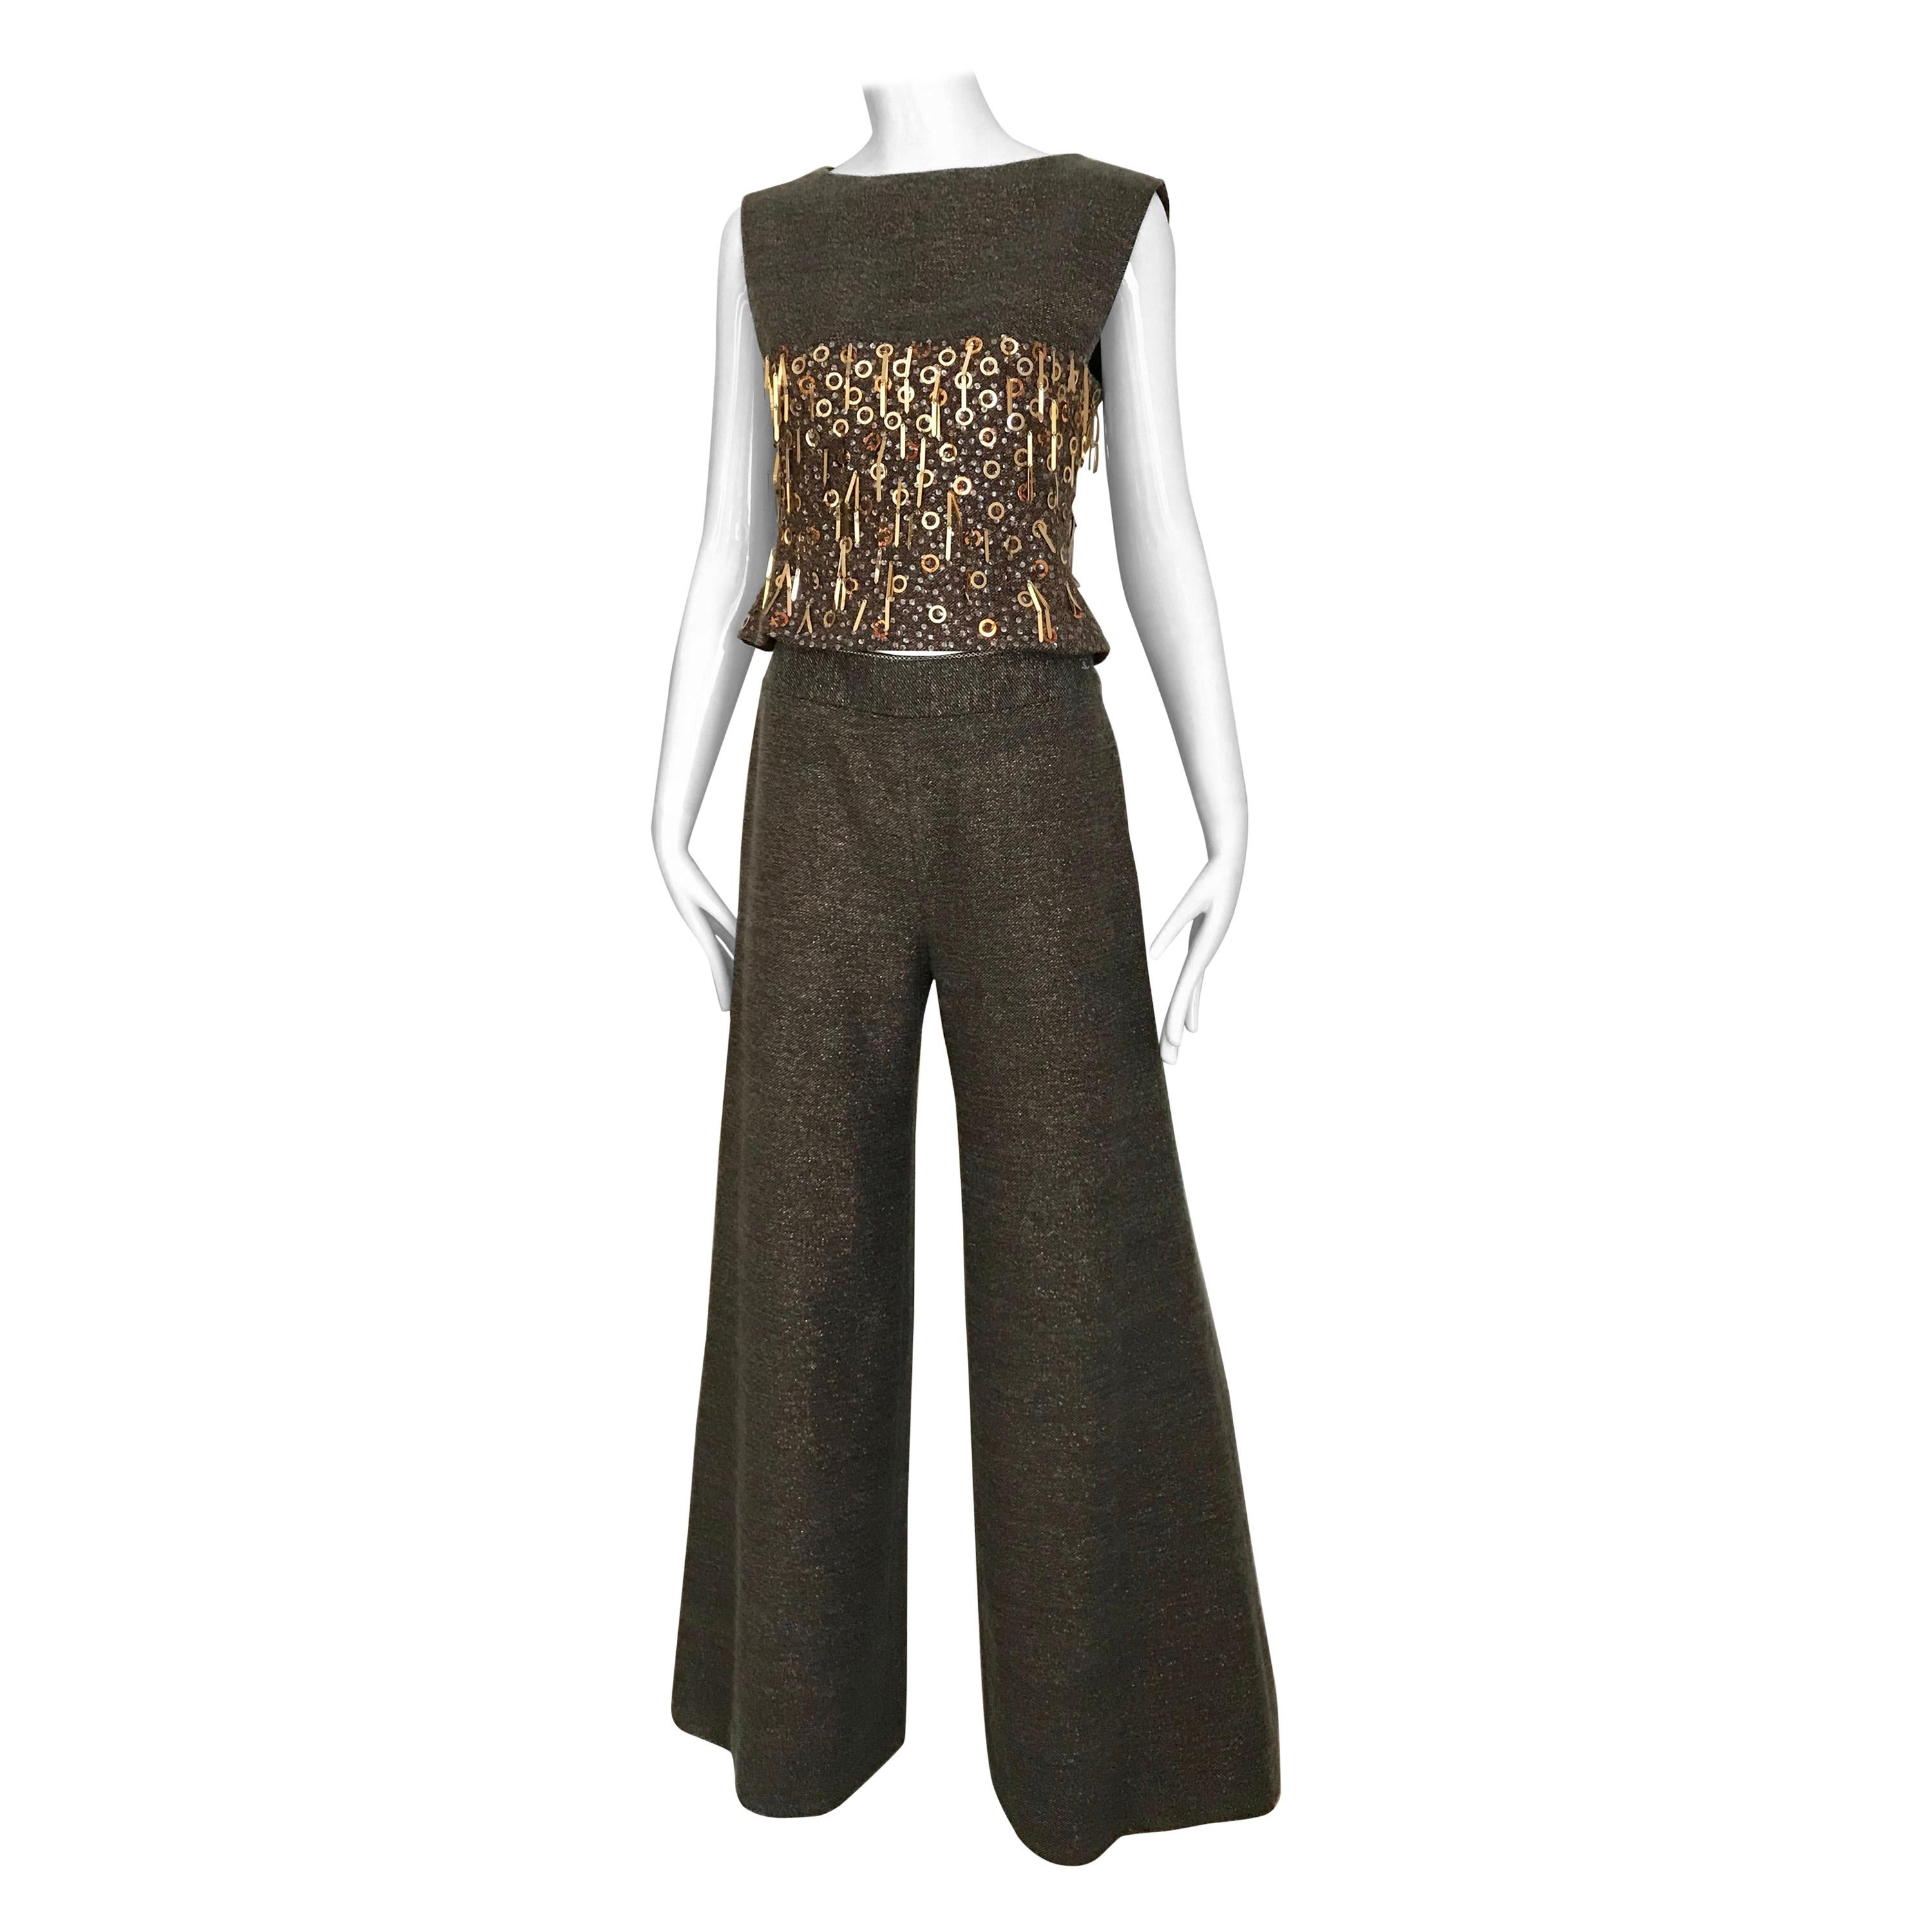 CHANEL Brown Wool Sleeveless Top and Pant Set